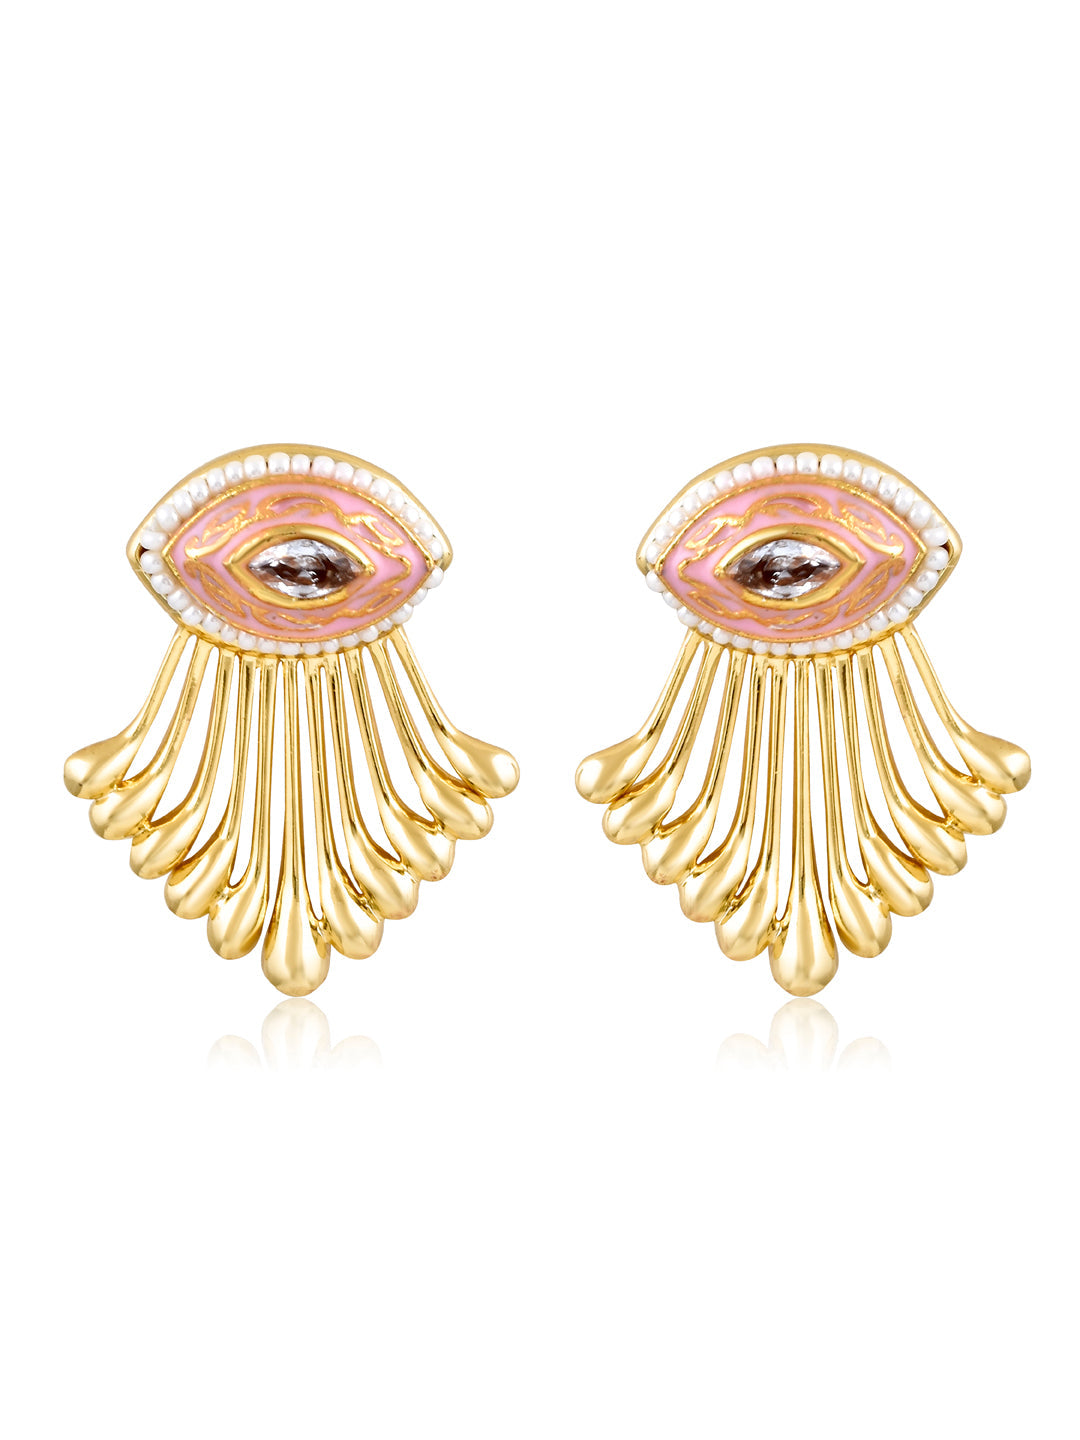 Aina Streax of Gold Pink Earrings 